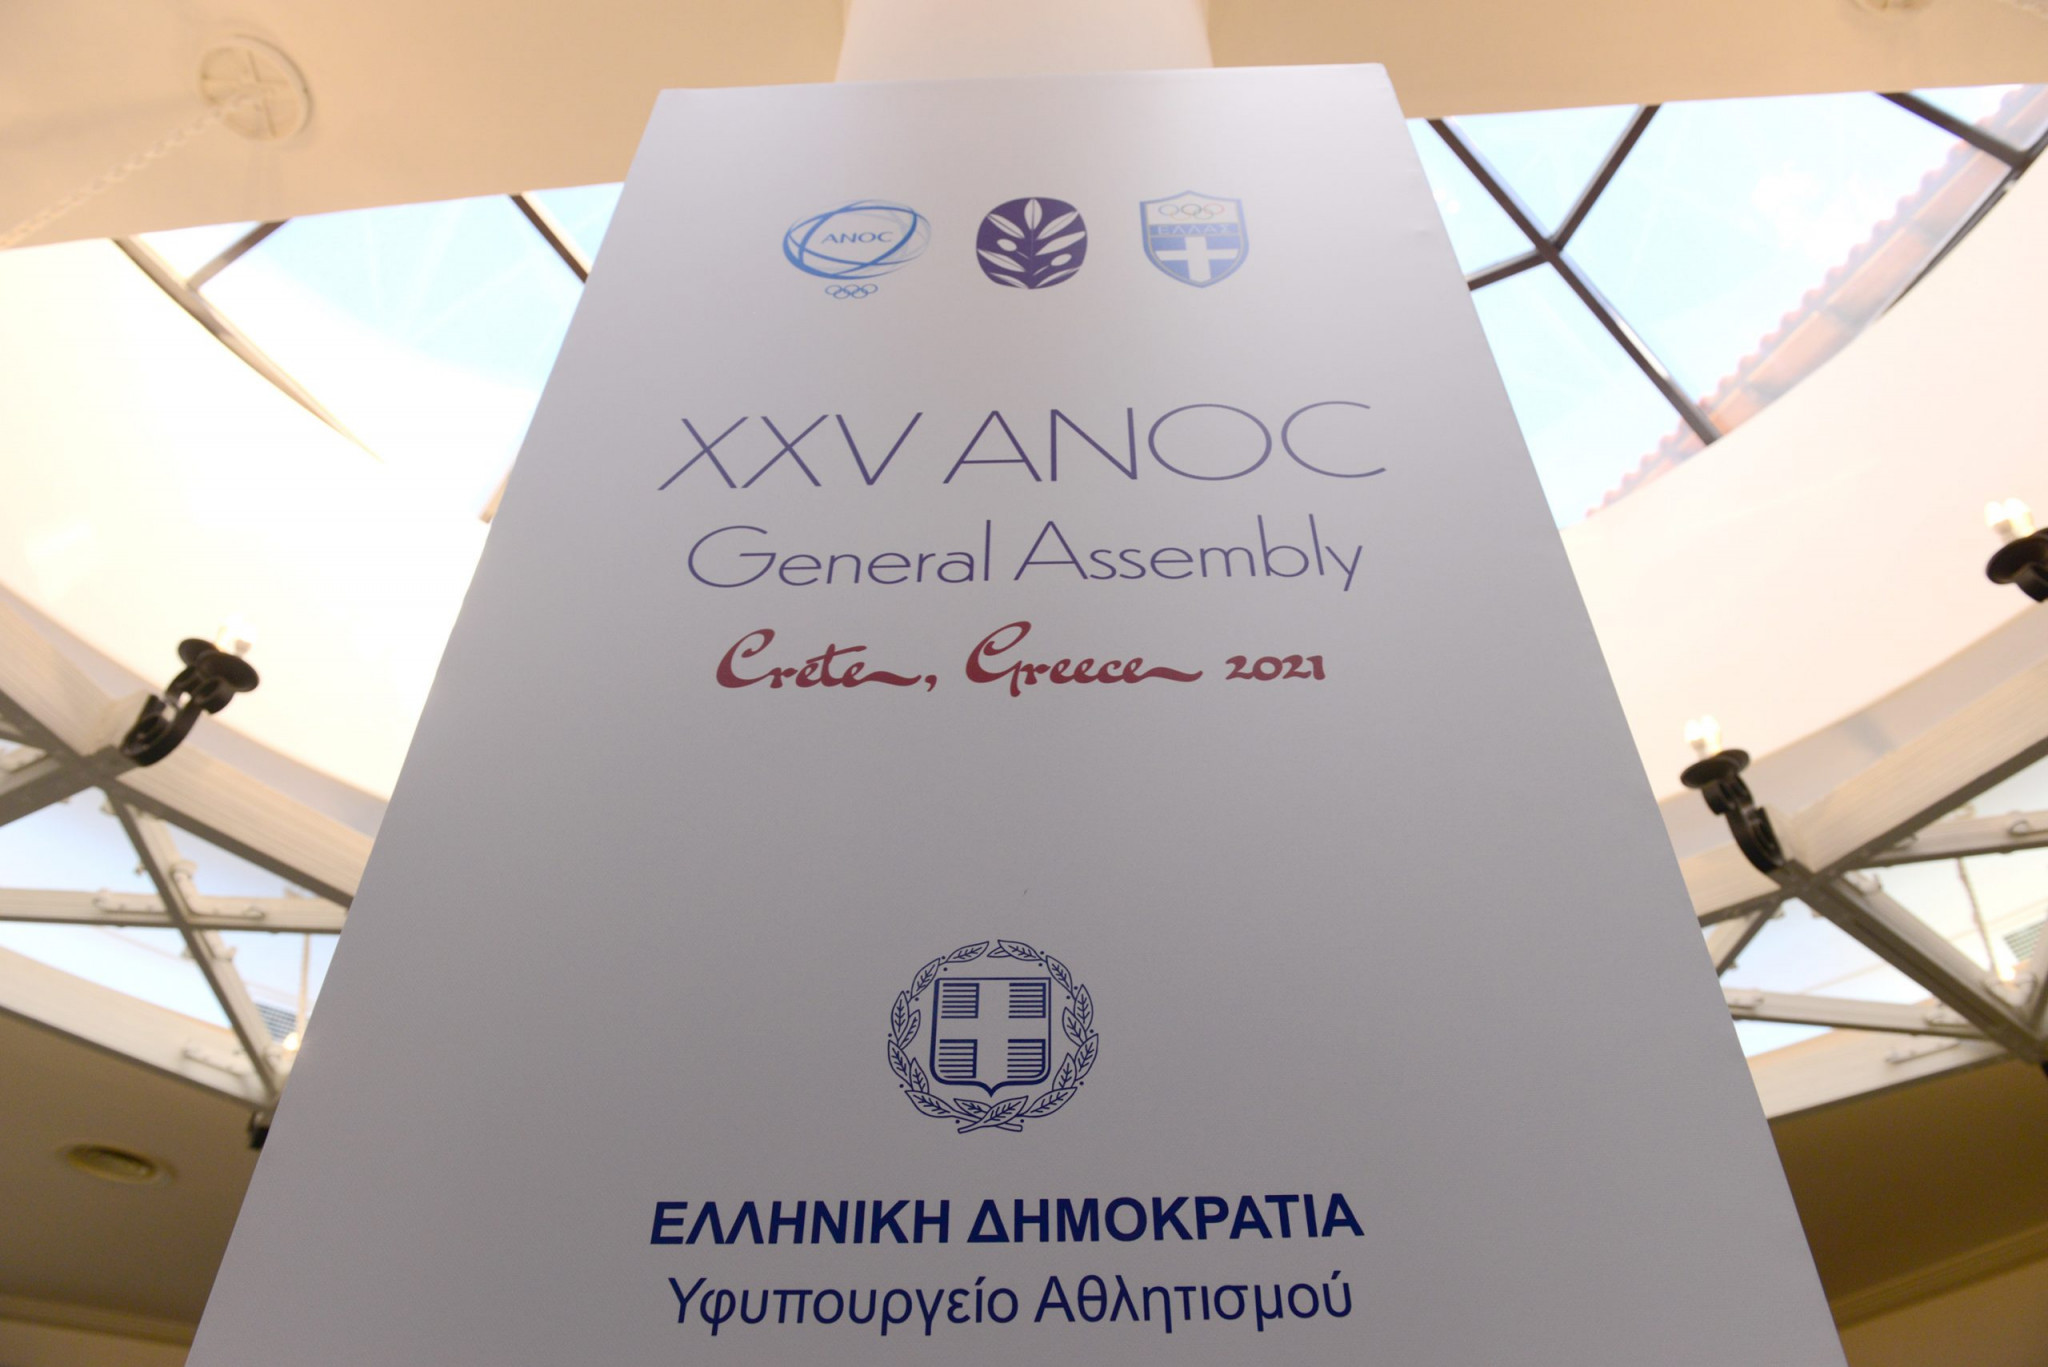 Crete is hosting this year's ANOC General Assembly instead of Athens ©ANOC